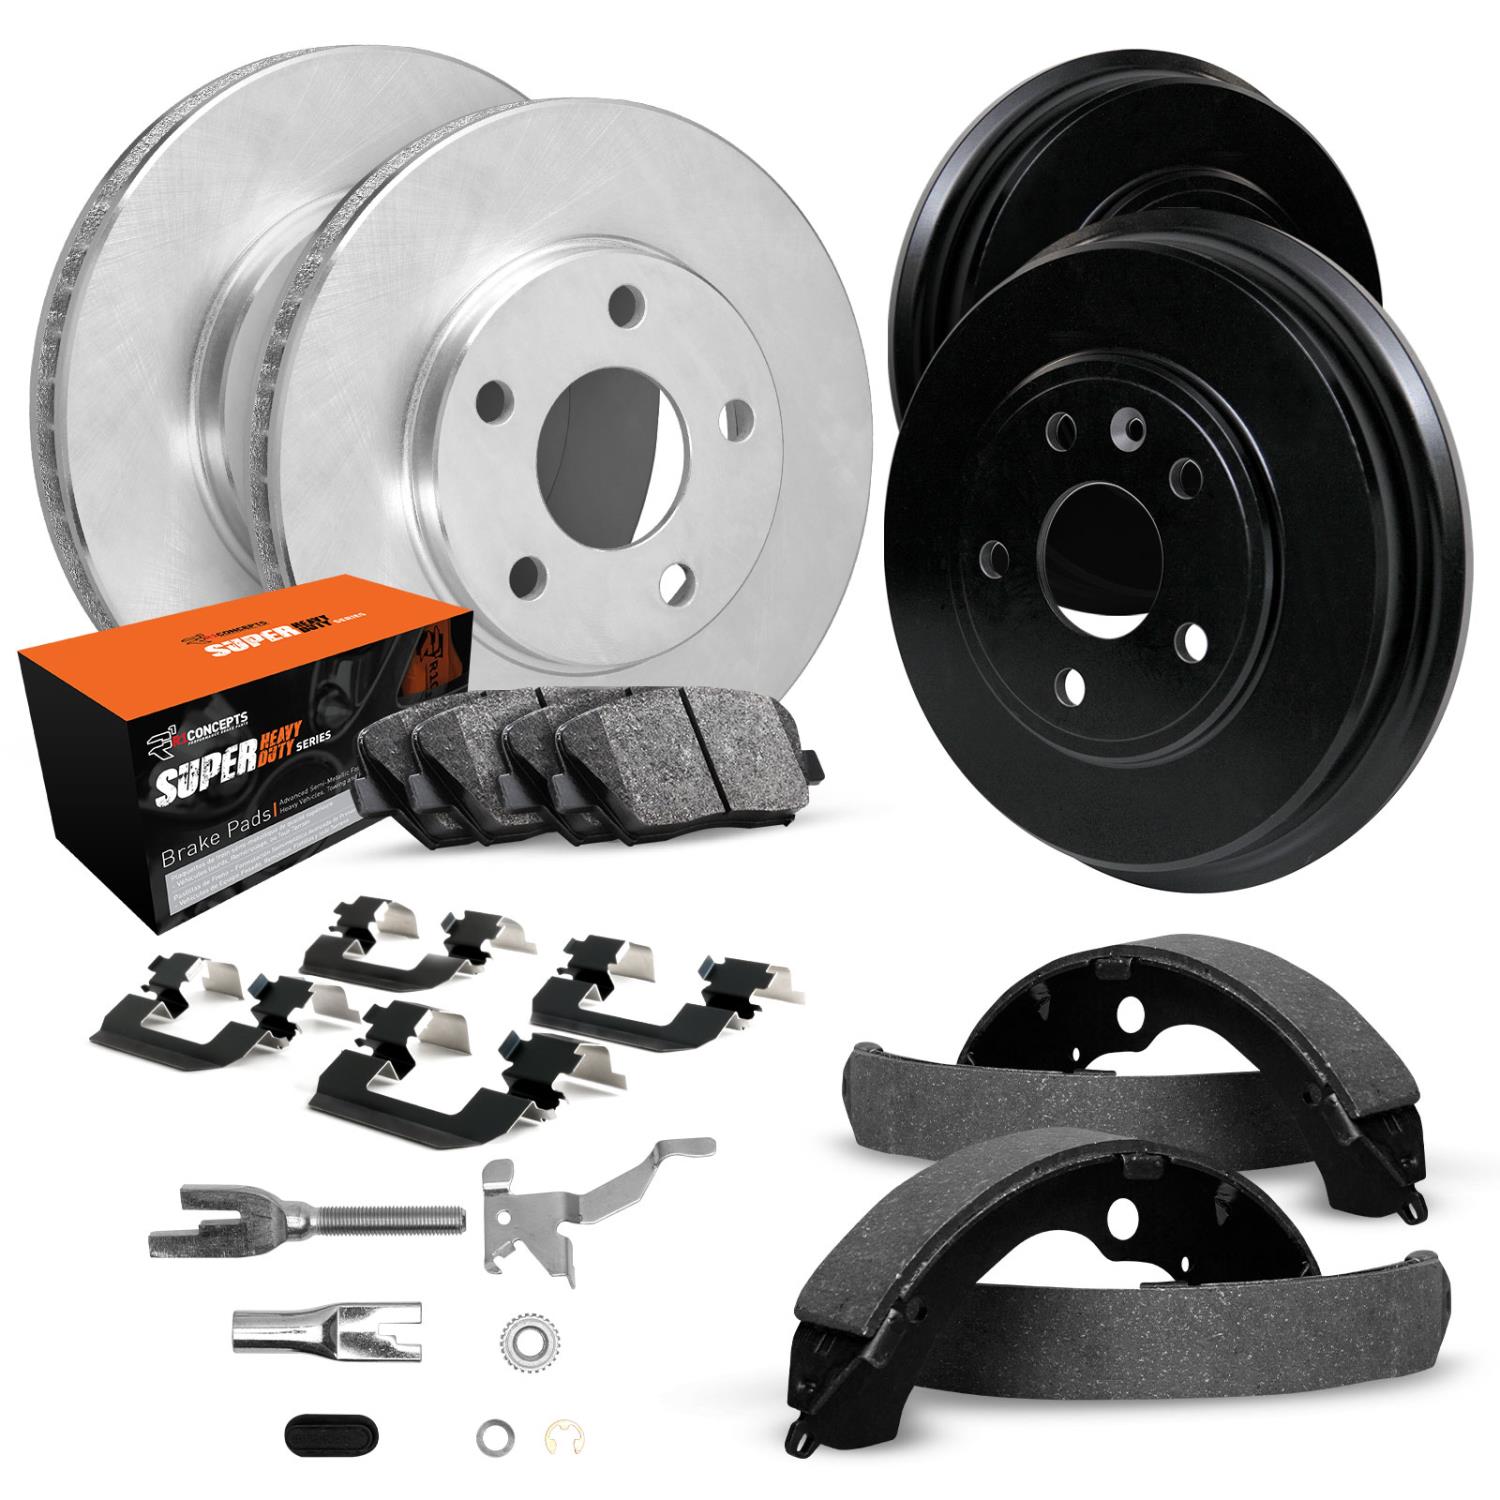 E-Line Blank Brake Rotor & Drum Set w/Super-Duty Pads, Shoes, Hardware, & Adjusters, 1975-1996 GM, Position: Front & Rear